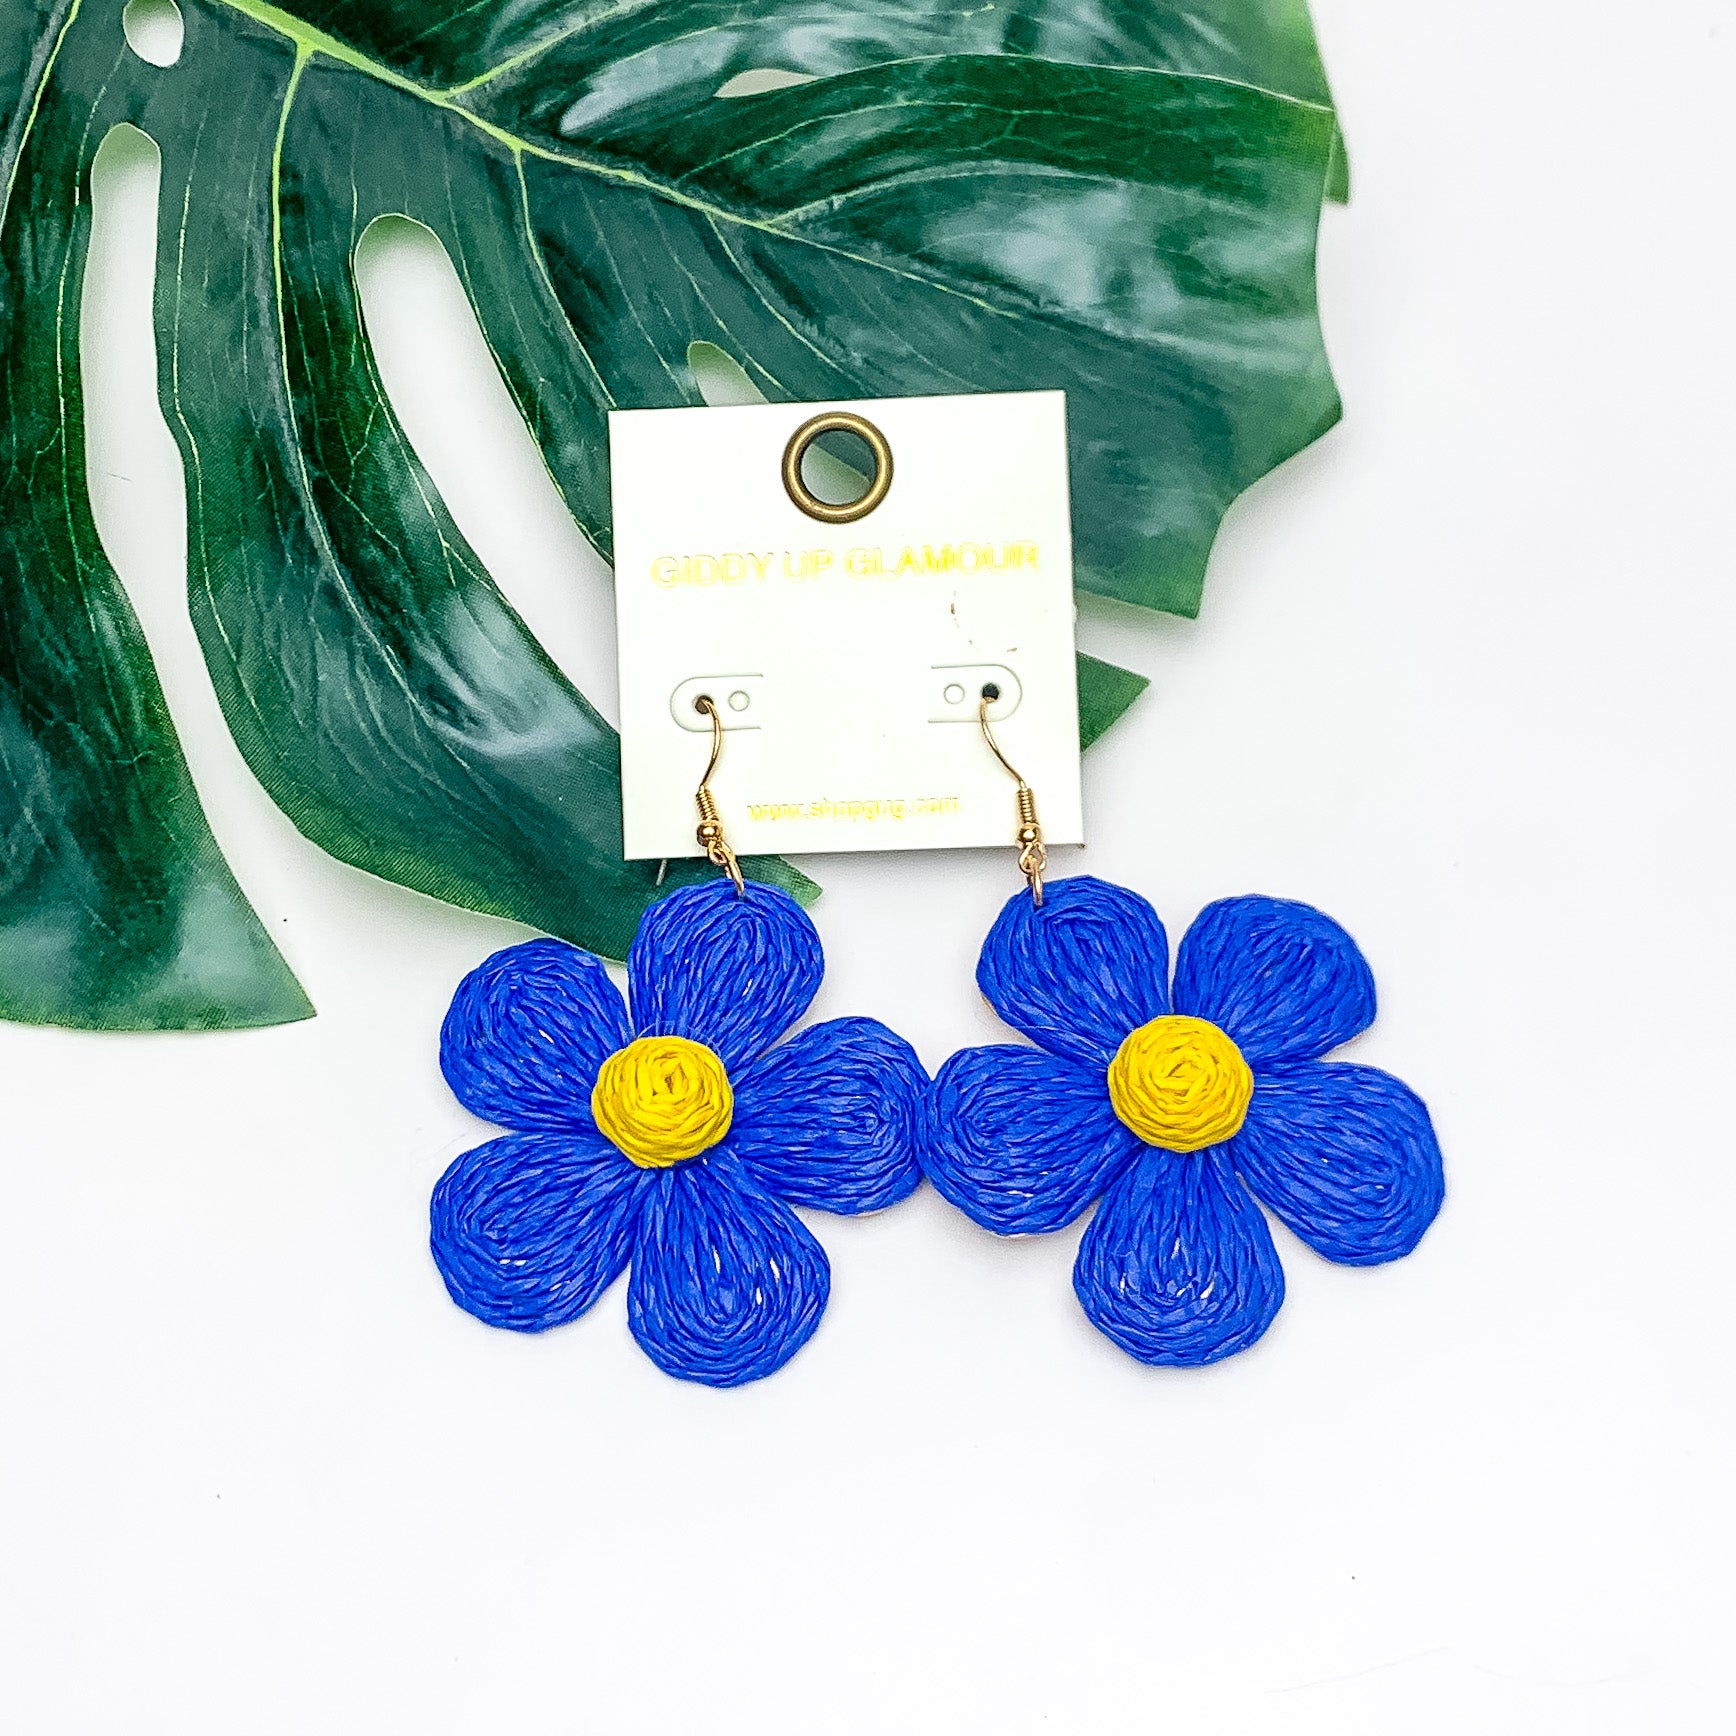 Darling Daisy Raffia Wrapped Flower Earrings in Blue. Pictured on a white background with the earrings laying on a large leaf.